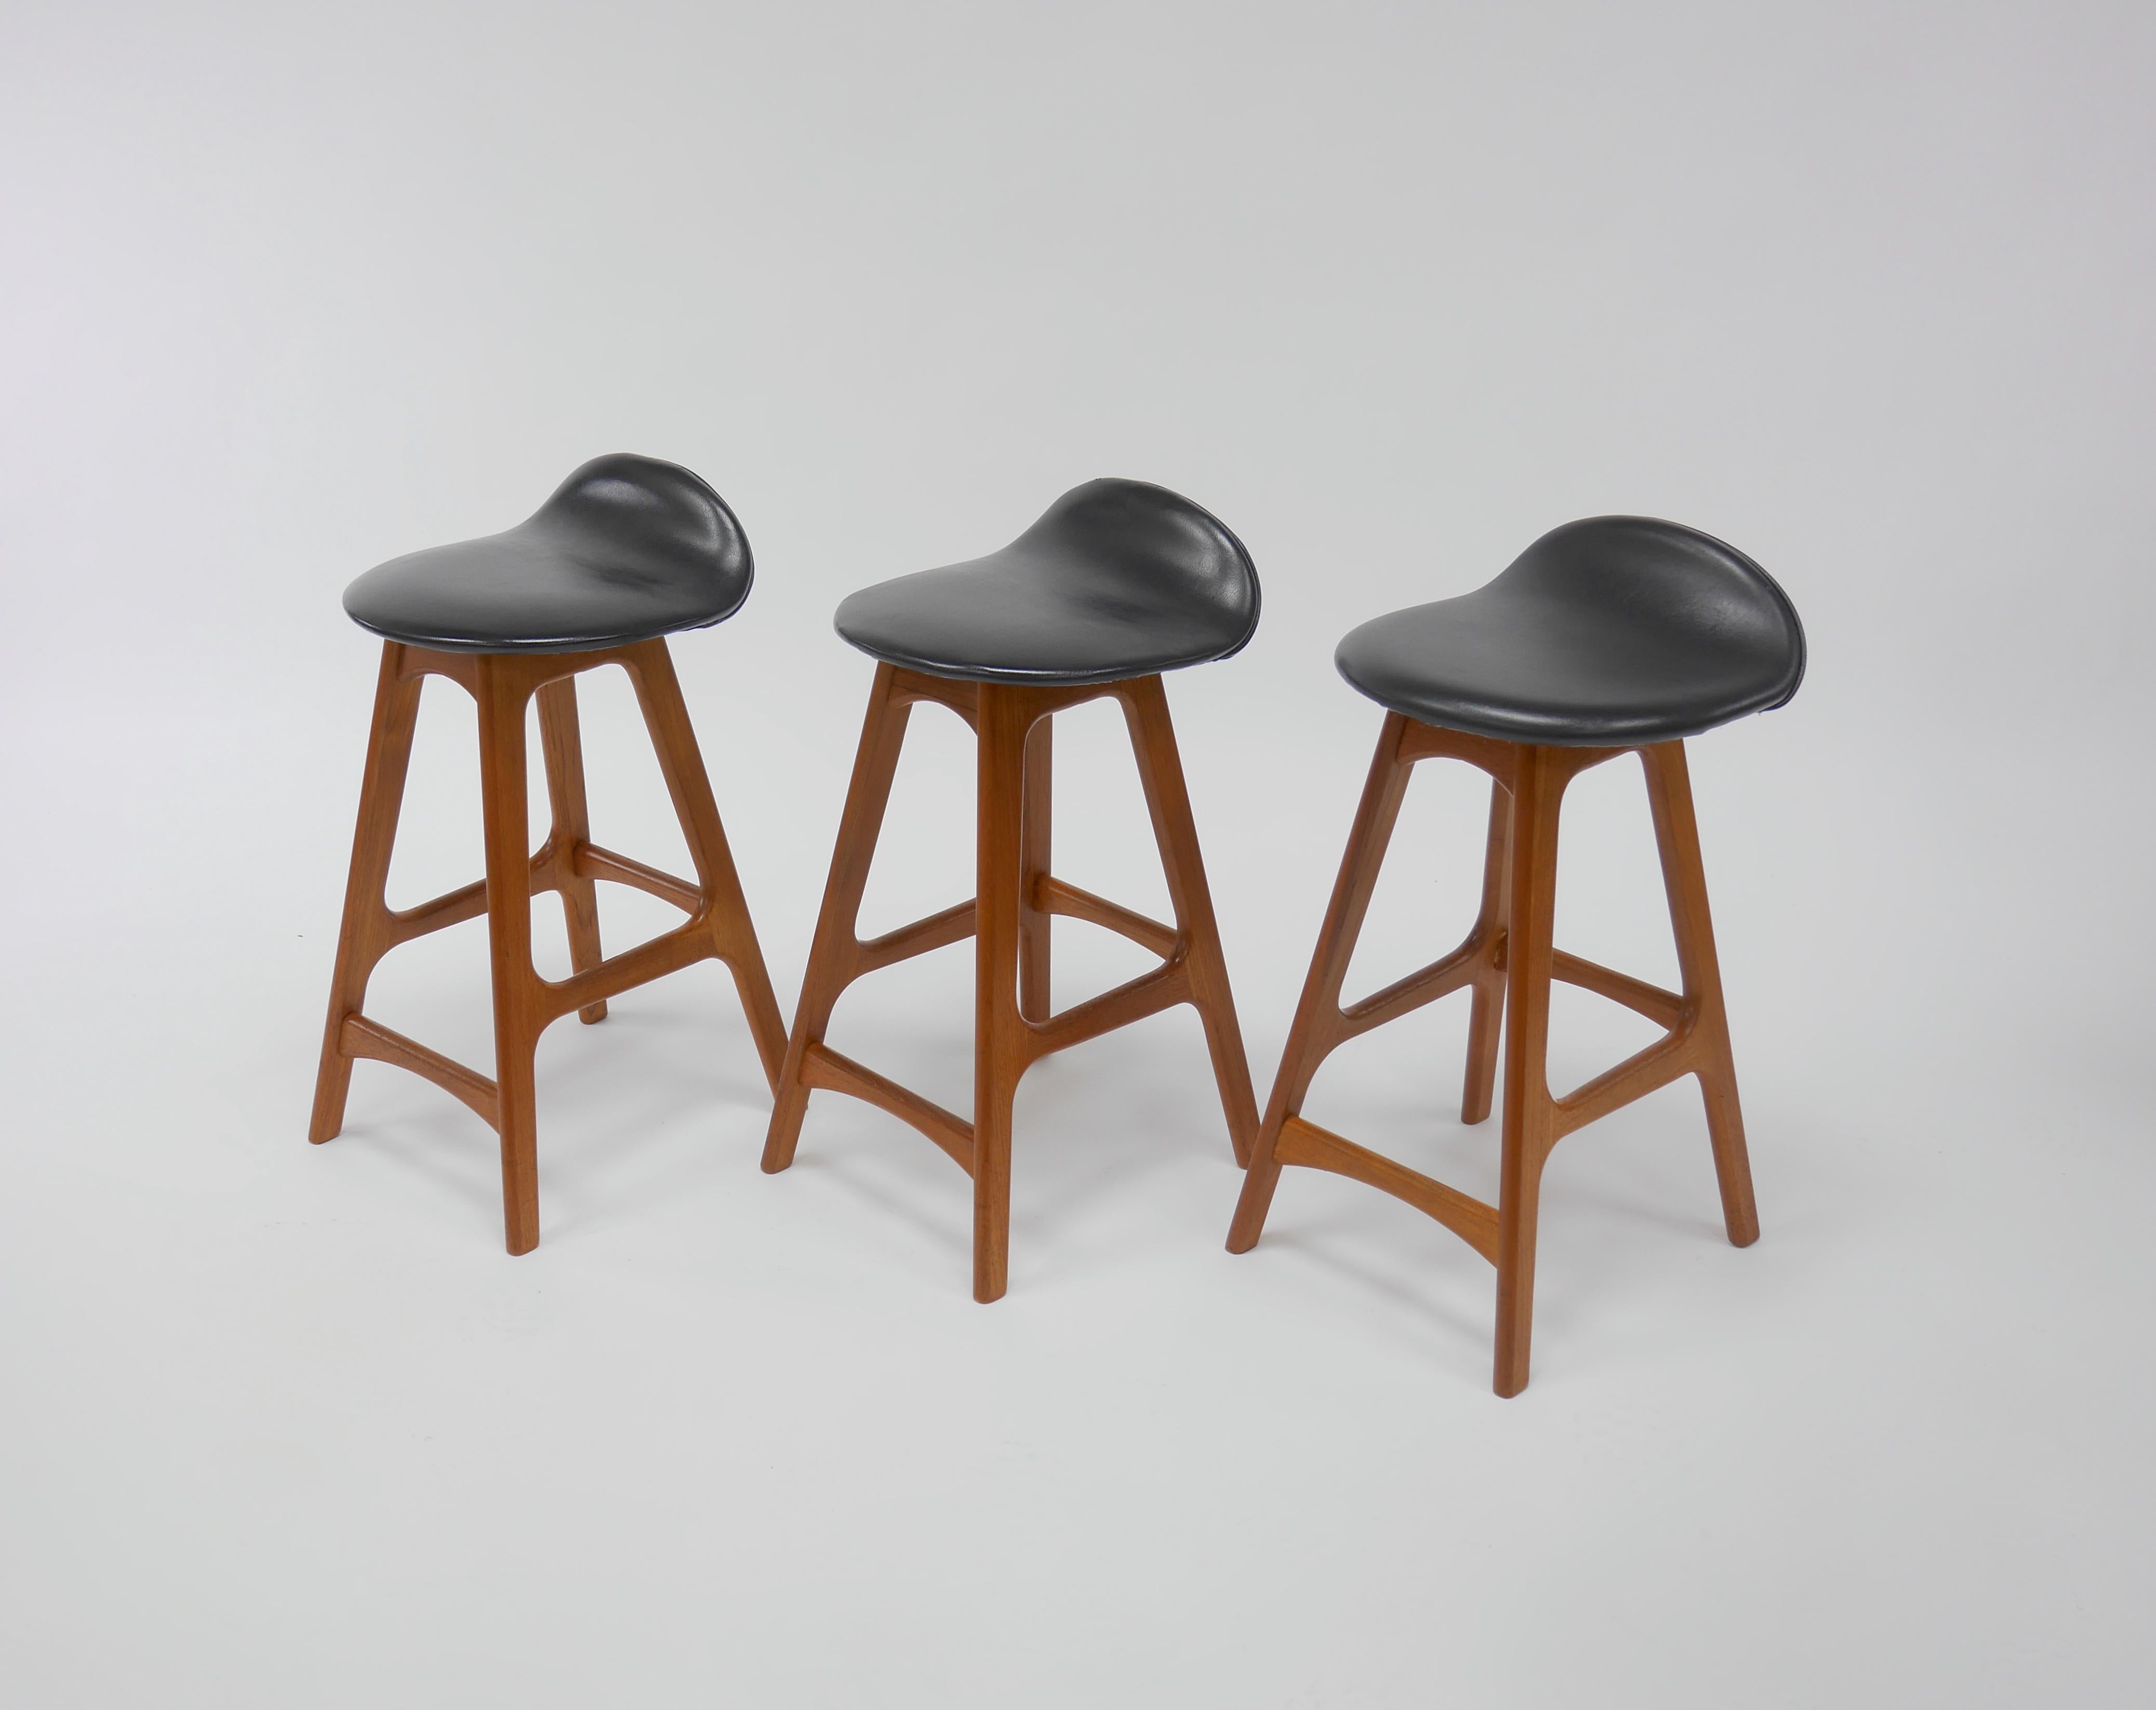 Set of 3 counter height stools in Teak by Erik Buck for O.D. Mobler circa 1970

We have another set of 3 stools, 6 total. All stools are from the same set and match in patina and fabric.

Dimensions:
H 26.5 in. x W 13 in. x D 14 in.
H 67.31 cm